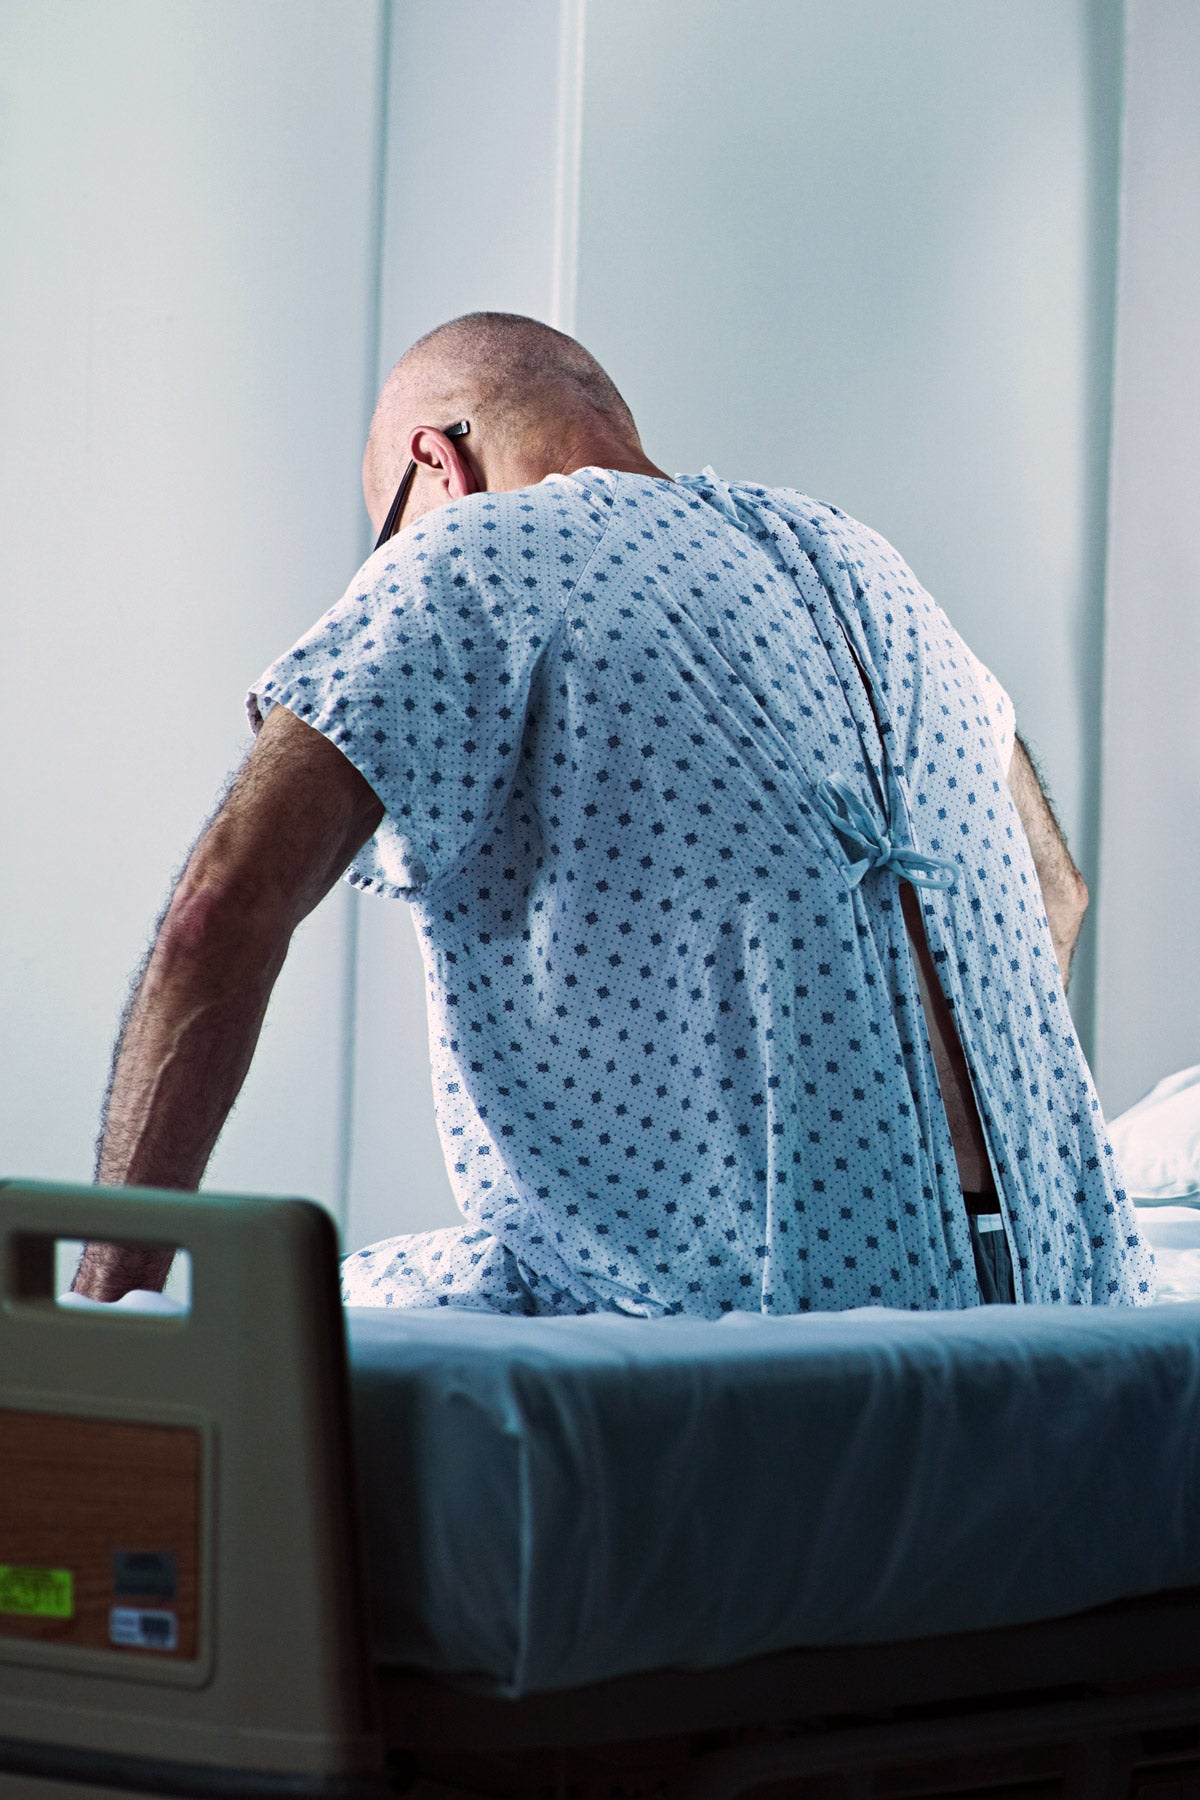 A bald, adult man wearing a hospital gown sits on the side of a hospital bed with his back facing the camera. His hands rest beside him in a pensive, thinking, position. A hospital curtain is in the foreground.